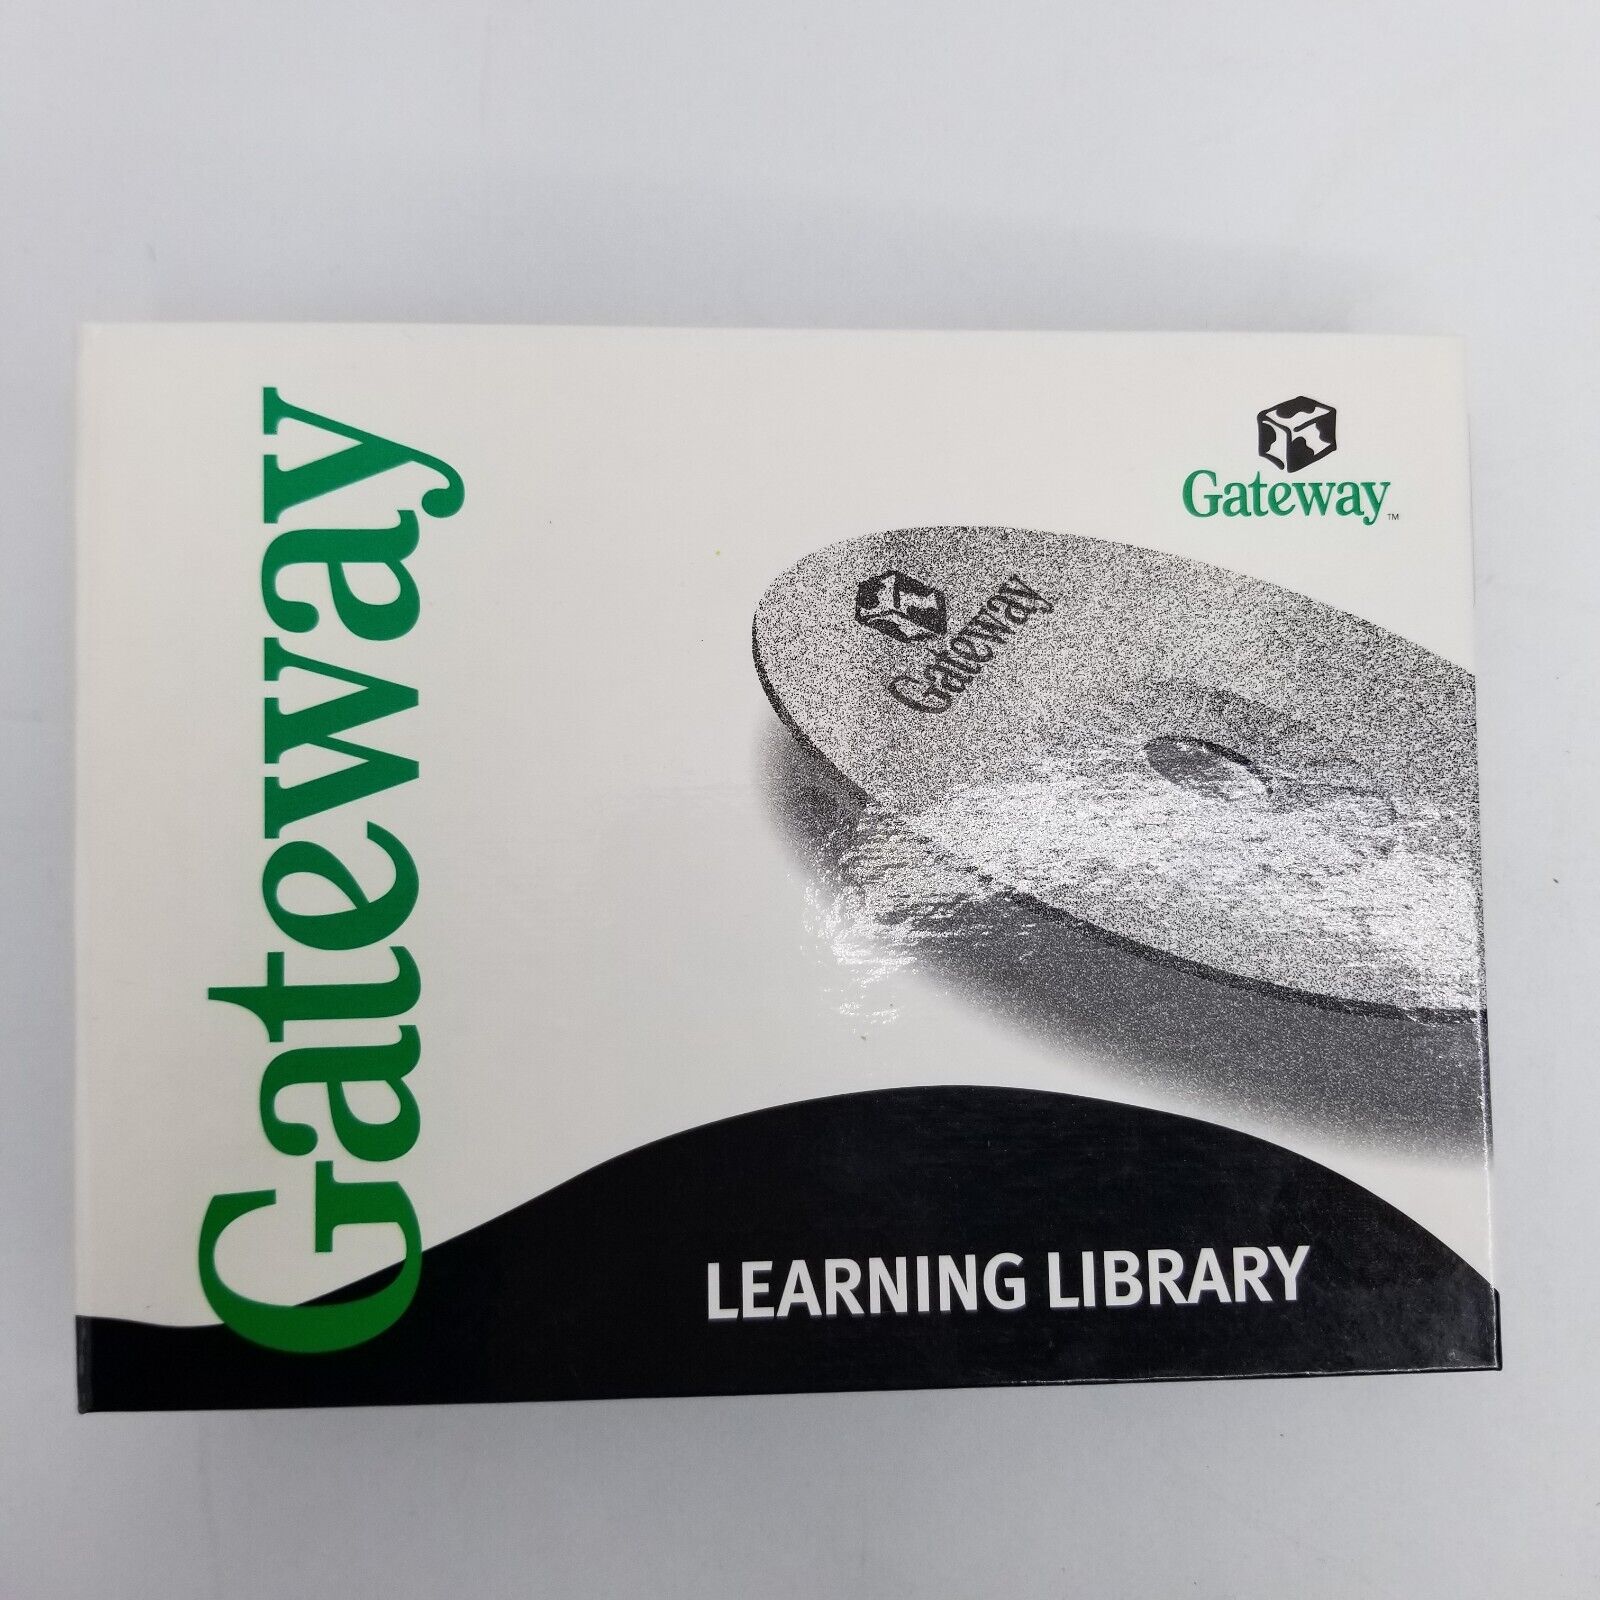 Gateway LEARNING LIBRARY, Software, 9 Compact Discs CDs, 1999, Reference